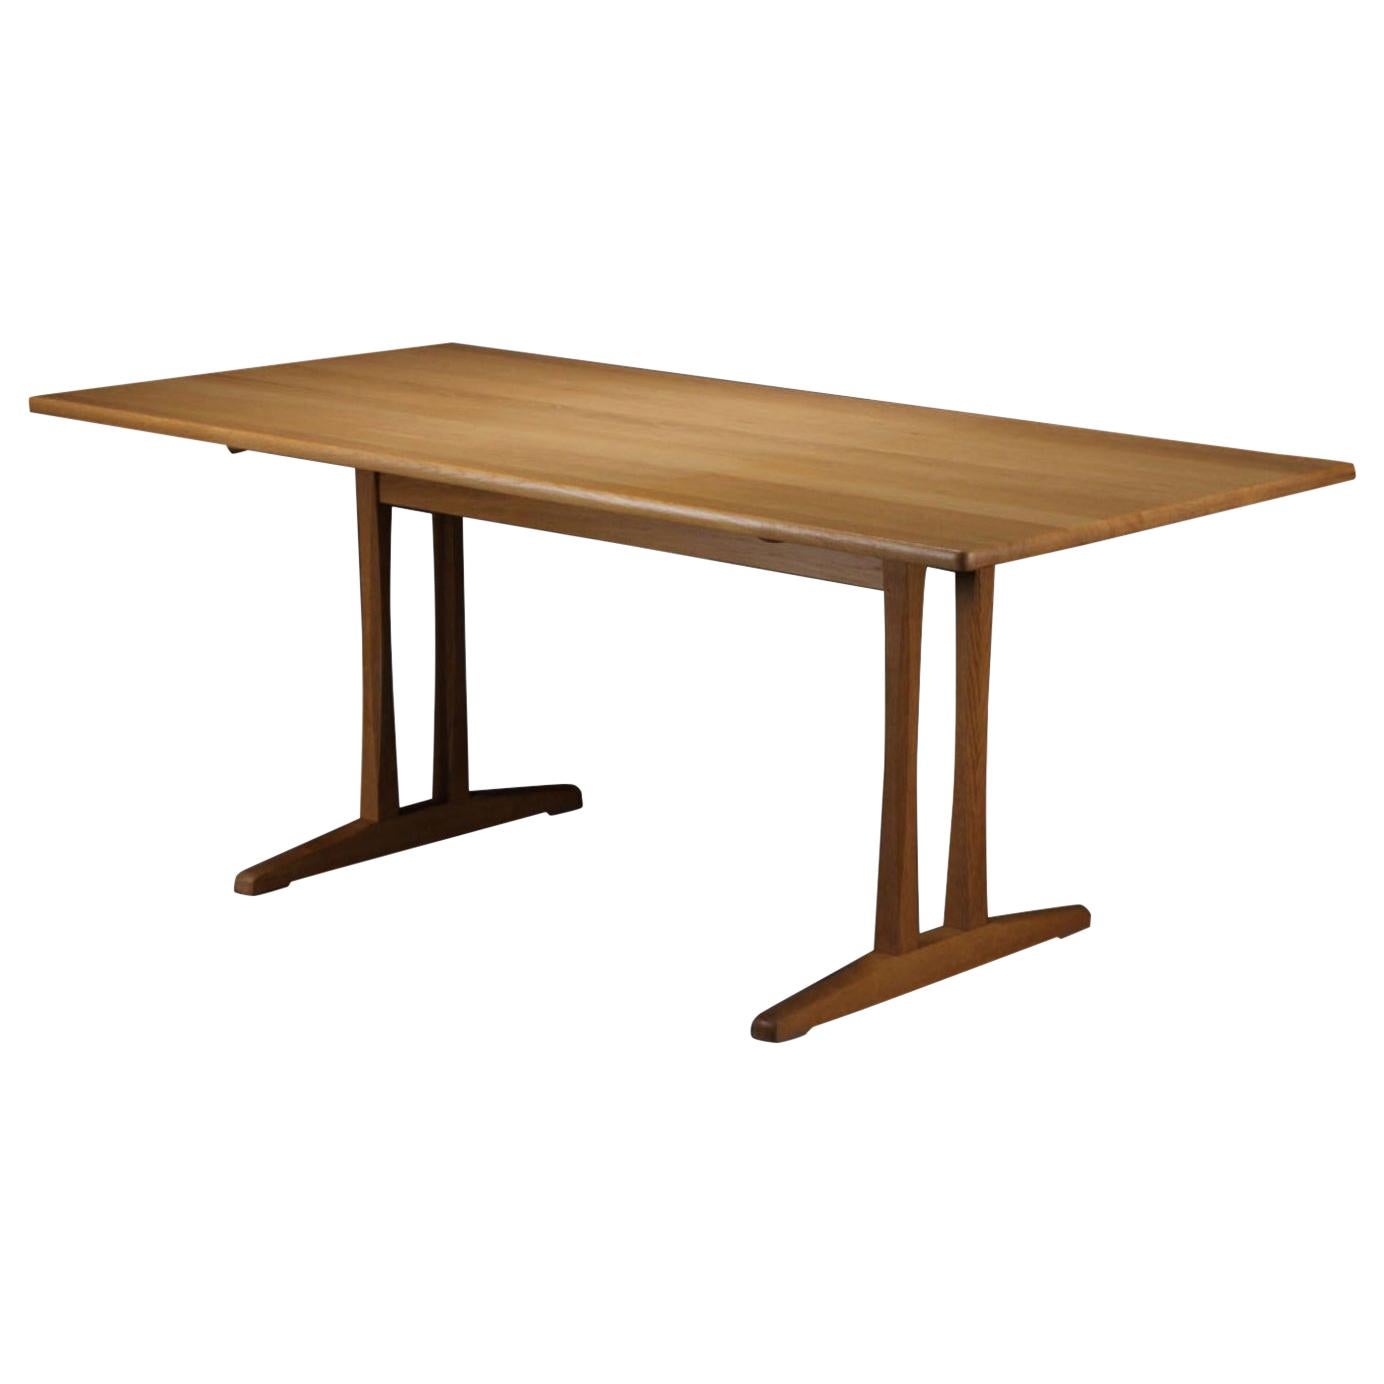 1960s Borge Mogensen Refinished Dining Table in Oak by FDB Mobler For Sale